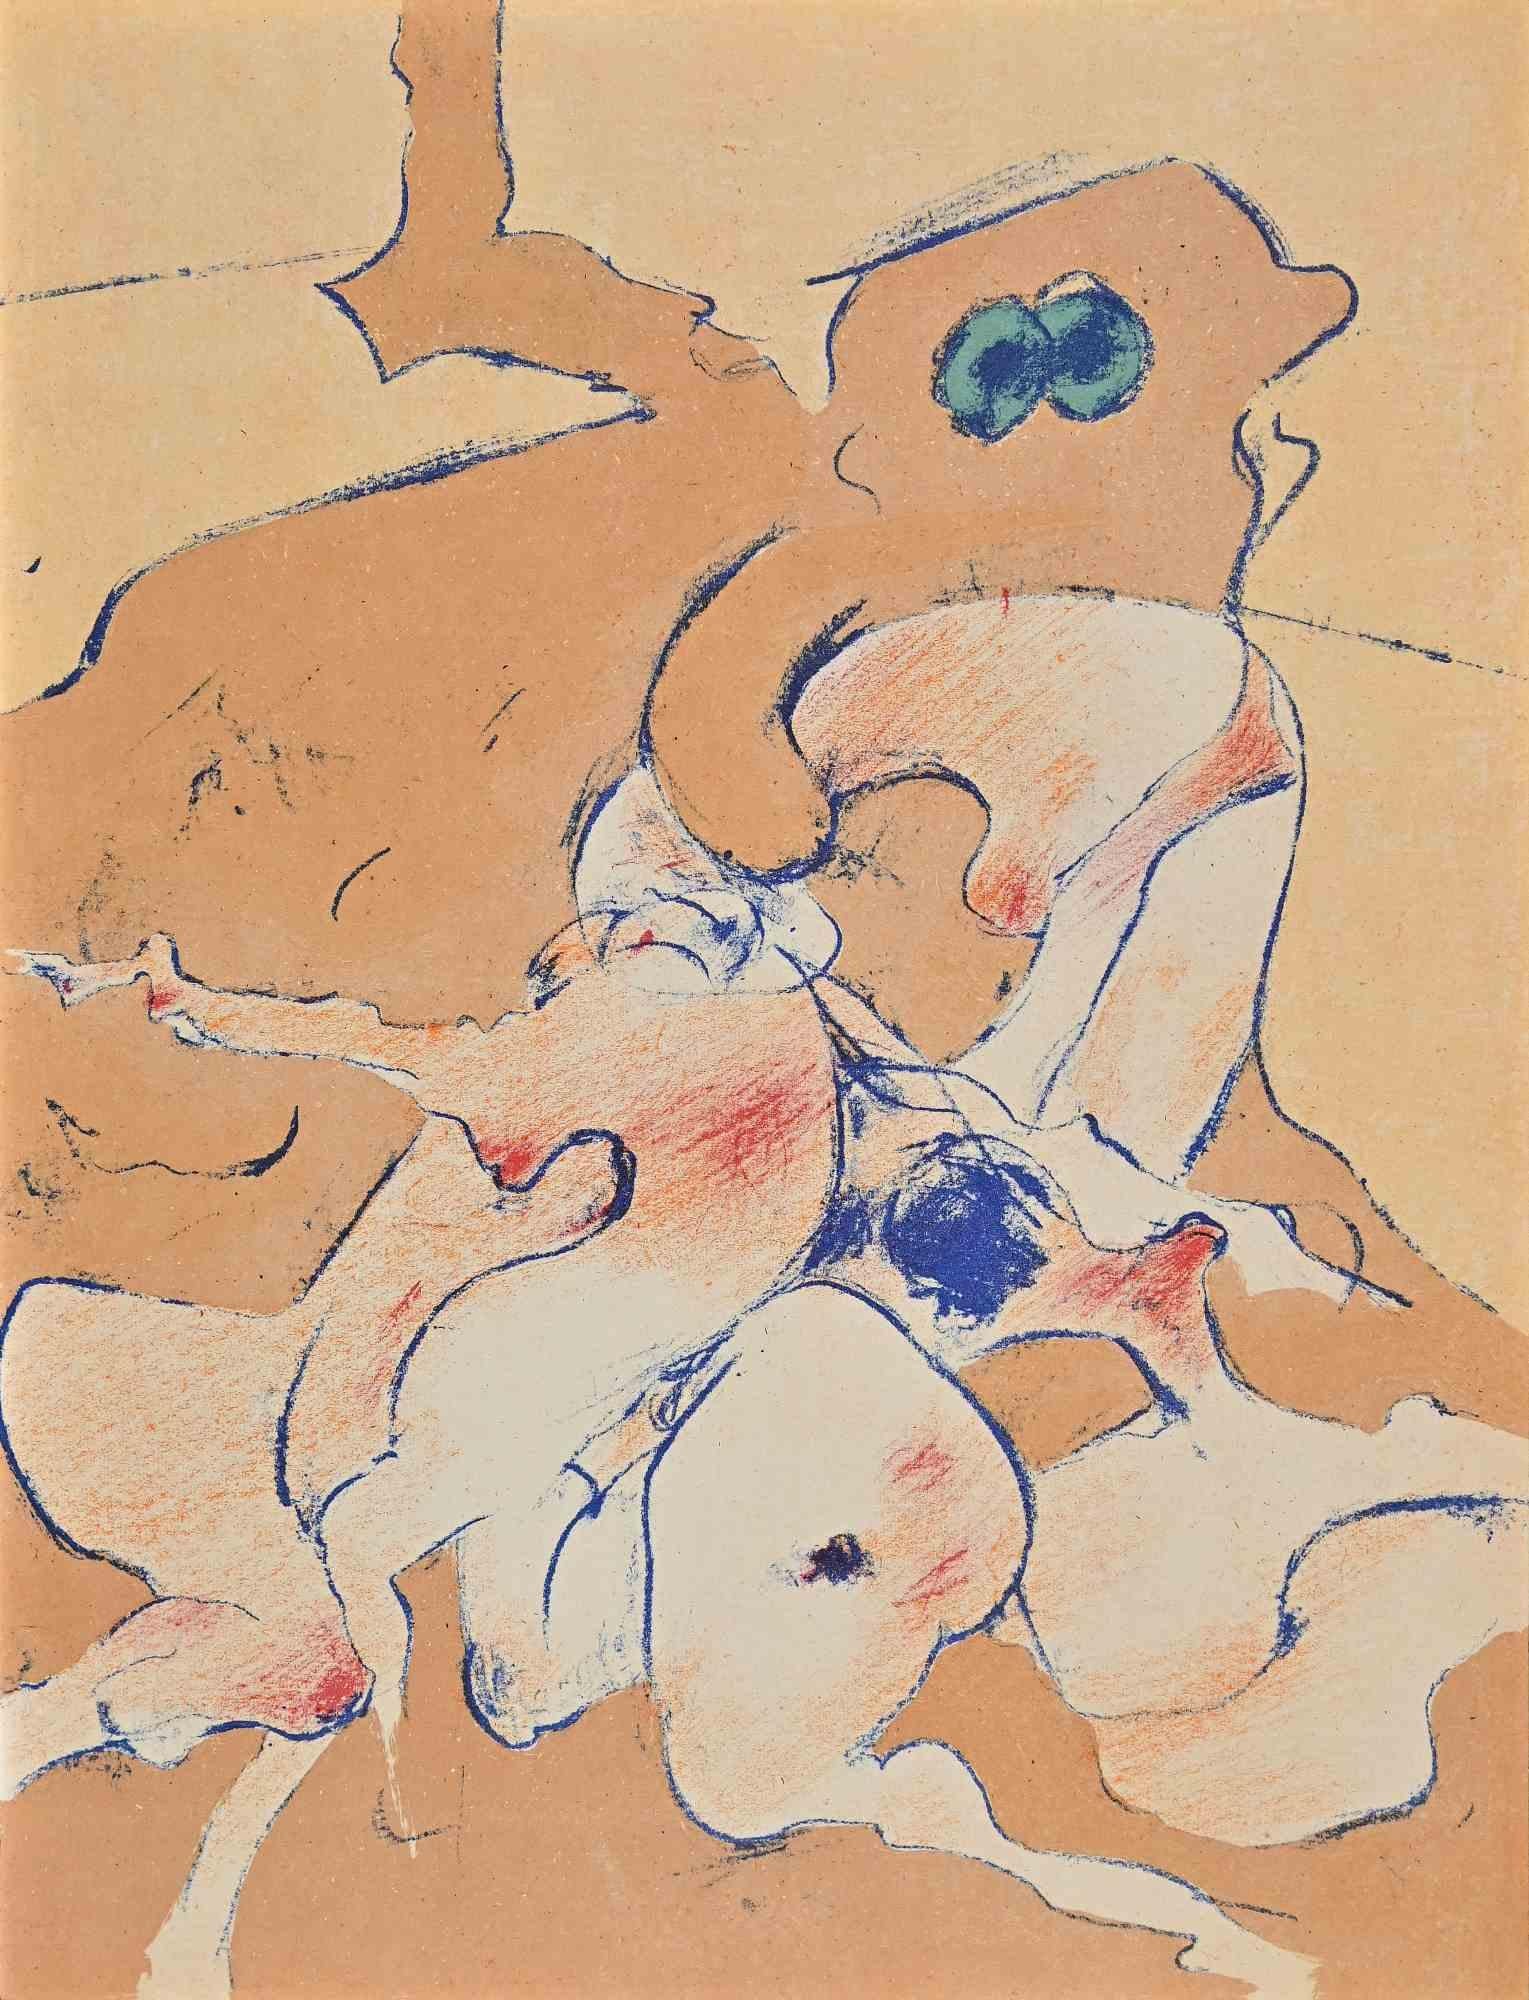 Untitled  is an artwork realized by Dorothea Tanning  in 1974.

Original colored lithograph.

Good conditions. Printed by  Atelier Pierre Chave in Vence, France.

This lithograph was realized  by the artist in 1974 for éditions XXe Siècle - Le